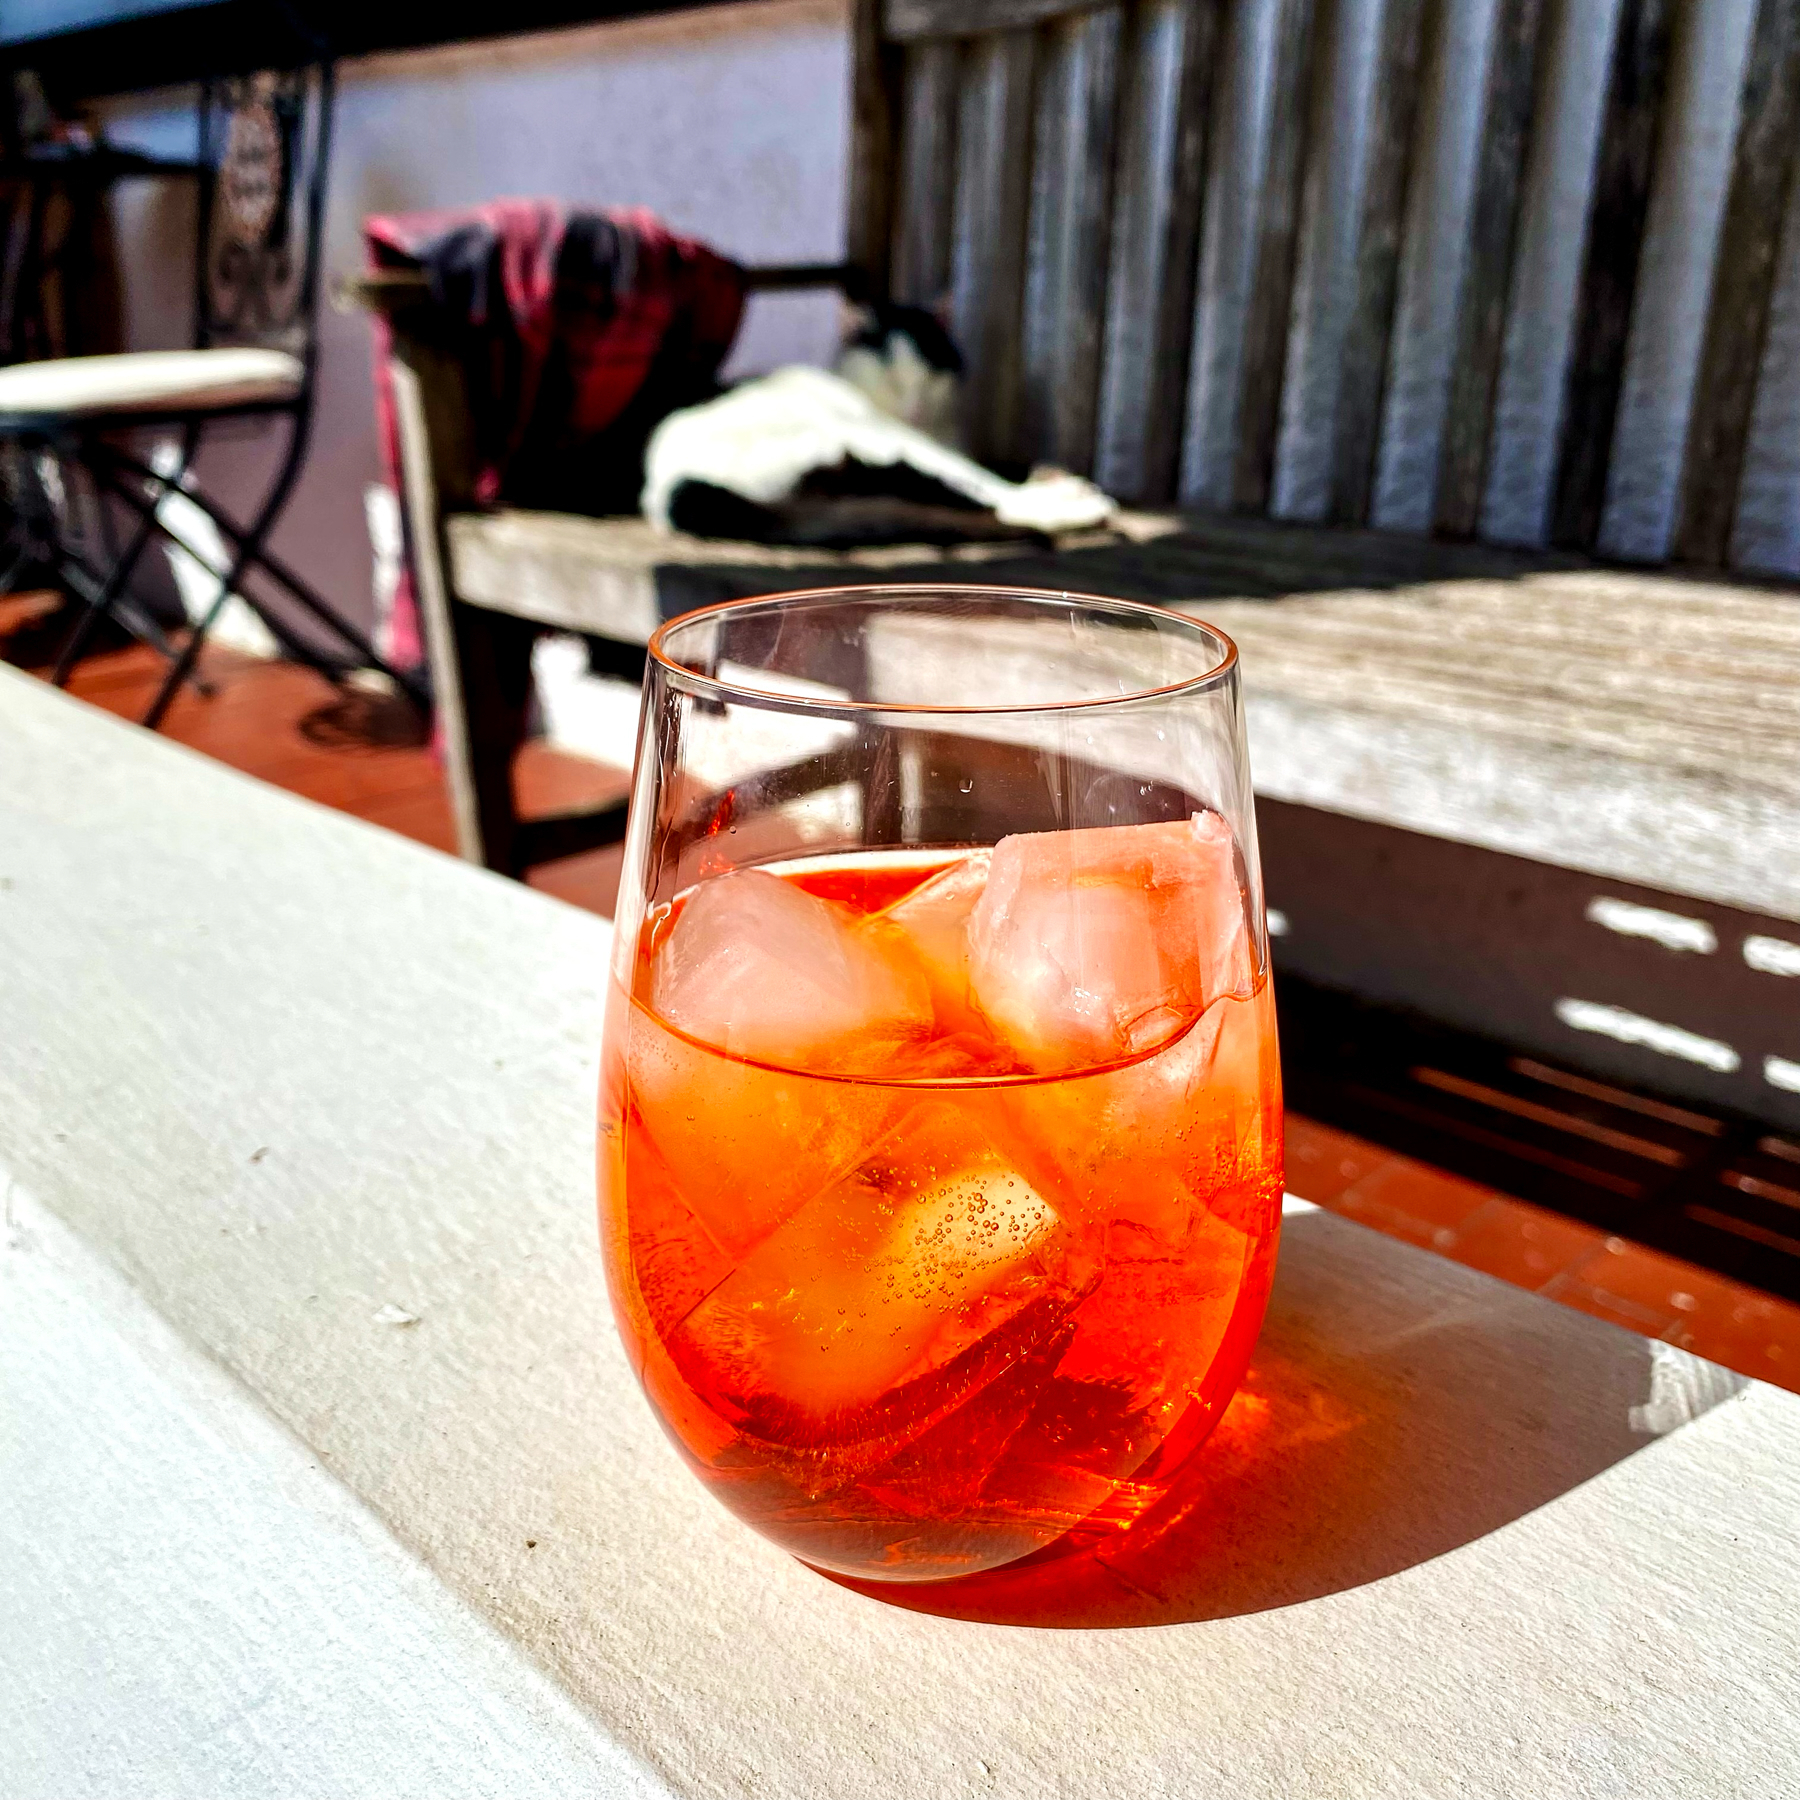 A glass of iced beverage on a sunny day, with a blurred background featuring outdoor seating.